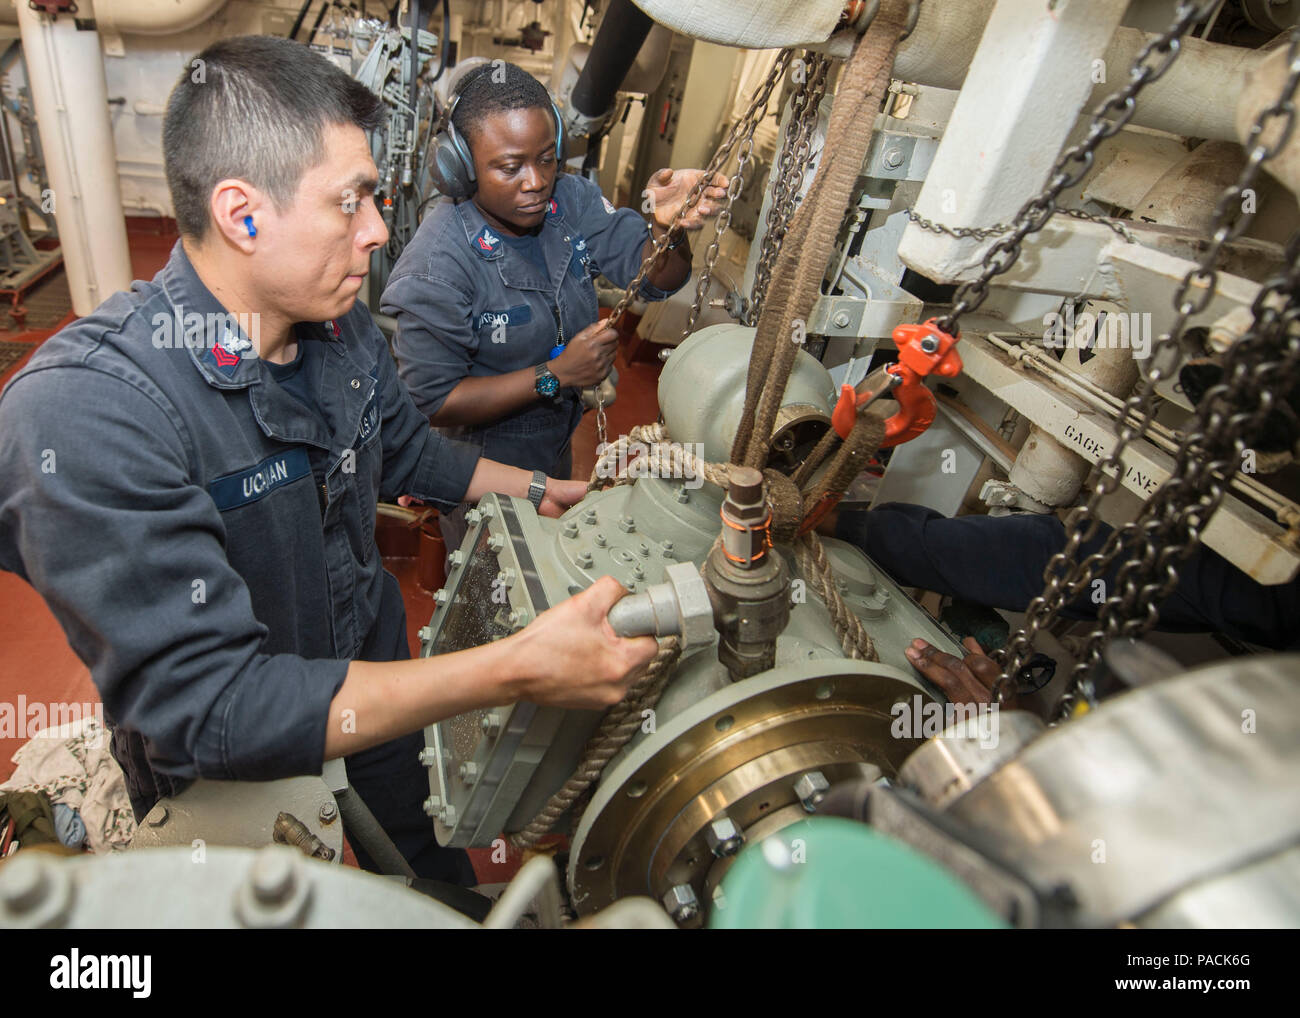 160318-N-DQ503-021 ATLANTIC OCEAN (March 18, 2016) – Gas Turbine Systems Technician 1st Class Rodolfo Ucanan, left, from Lima, Peru and Gas Turbine Systems Technician 2nd Class Cynthia Akemo, from Lagos, Nigeria, installs a replacement a main engine room aboard the guided-missile destroyer USS Roosevelt (DDG 80). Roosevelt is underway conducting Composite Training Unit Exercise (COMPTUEX) with the Dwight D. Eisenhower Carrier Strike Group in preparation for a future deployment. (U.S. Navy Photo by Mass Communication Specialist 3rd Class Taylor A. Elberg/Released) Stock Photo